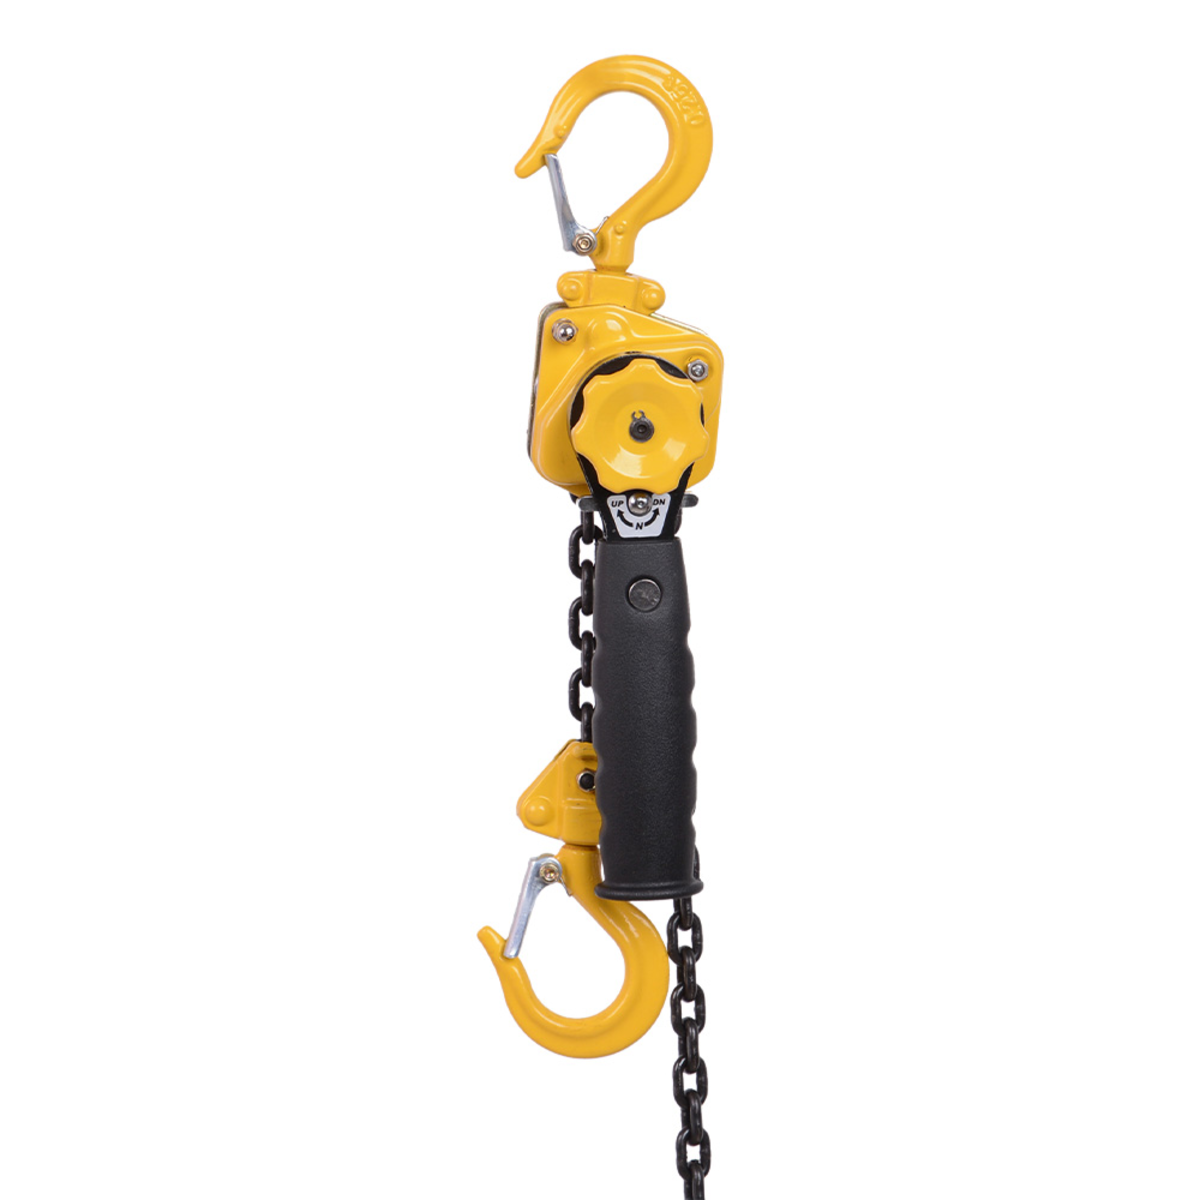 1 Ton Chain Hoist with 15 ft. Chain Fall and overload protection